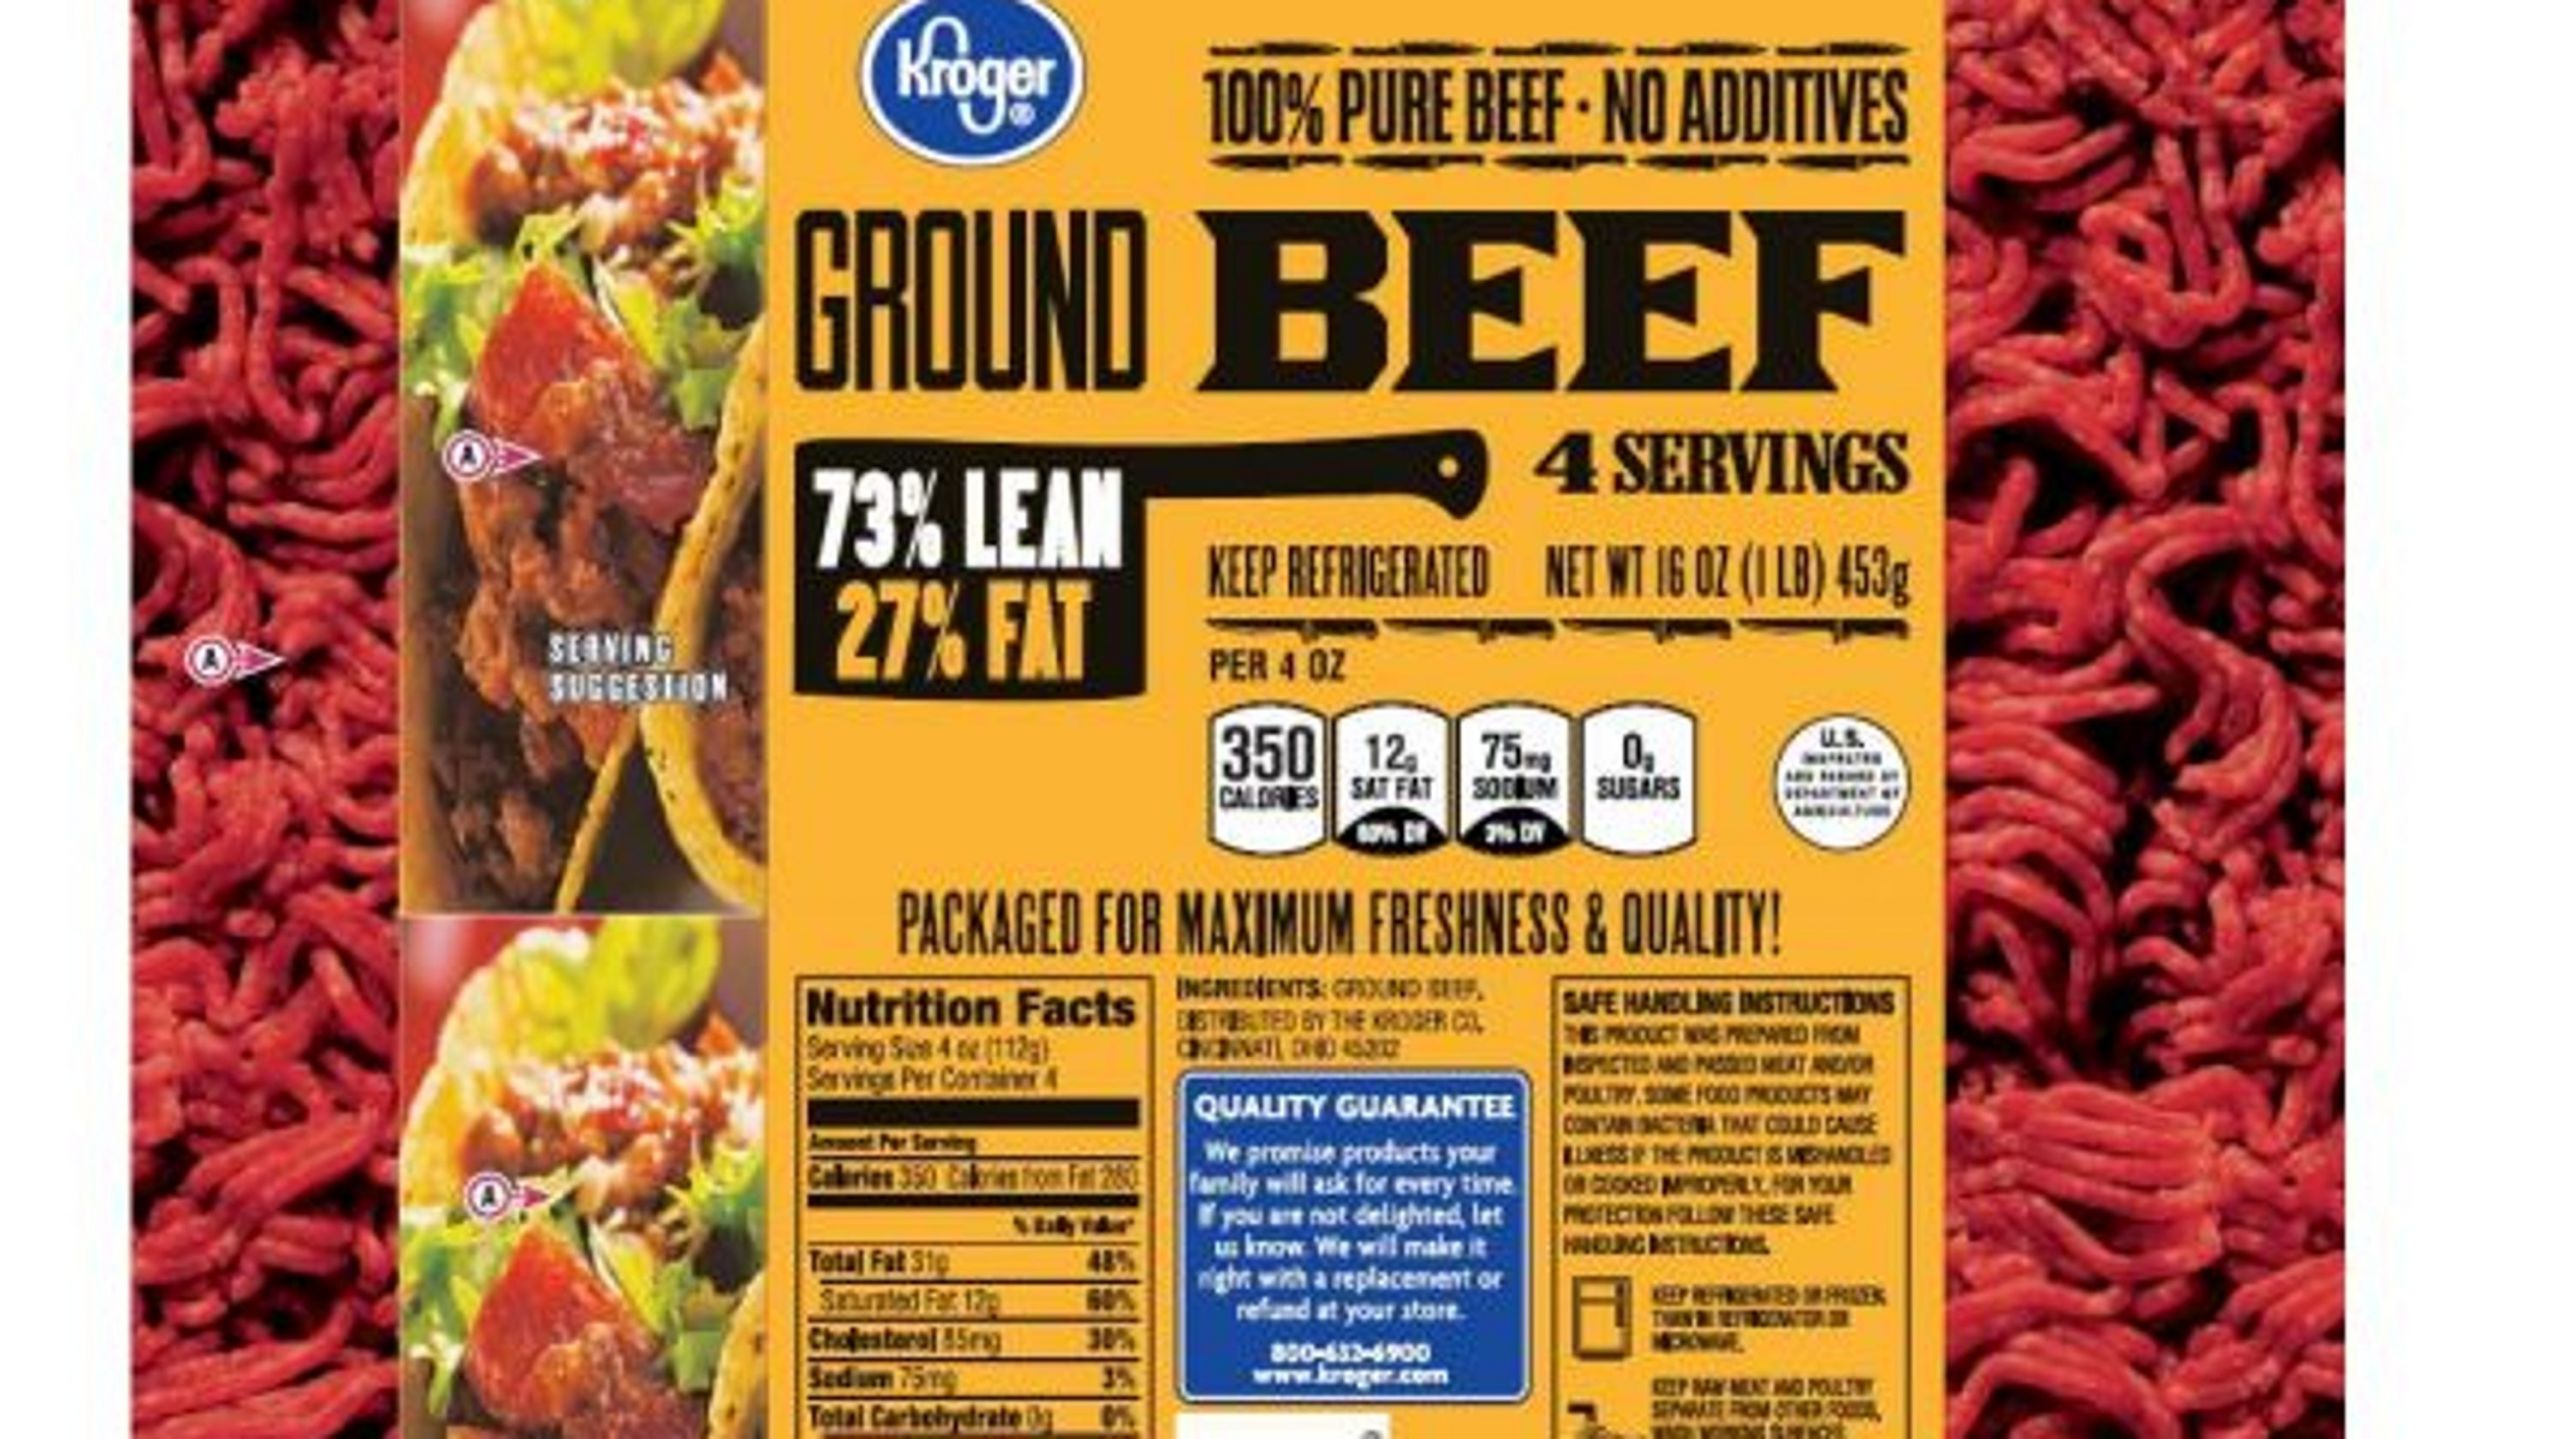 Recall Ground Beef
 JBS Tolleson ground beef recall Kroger product contained